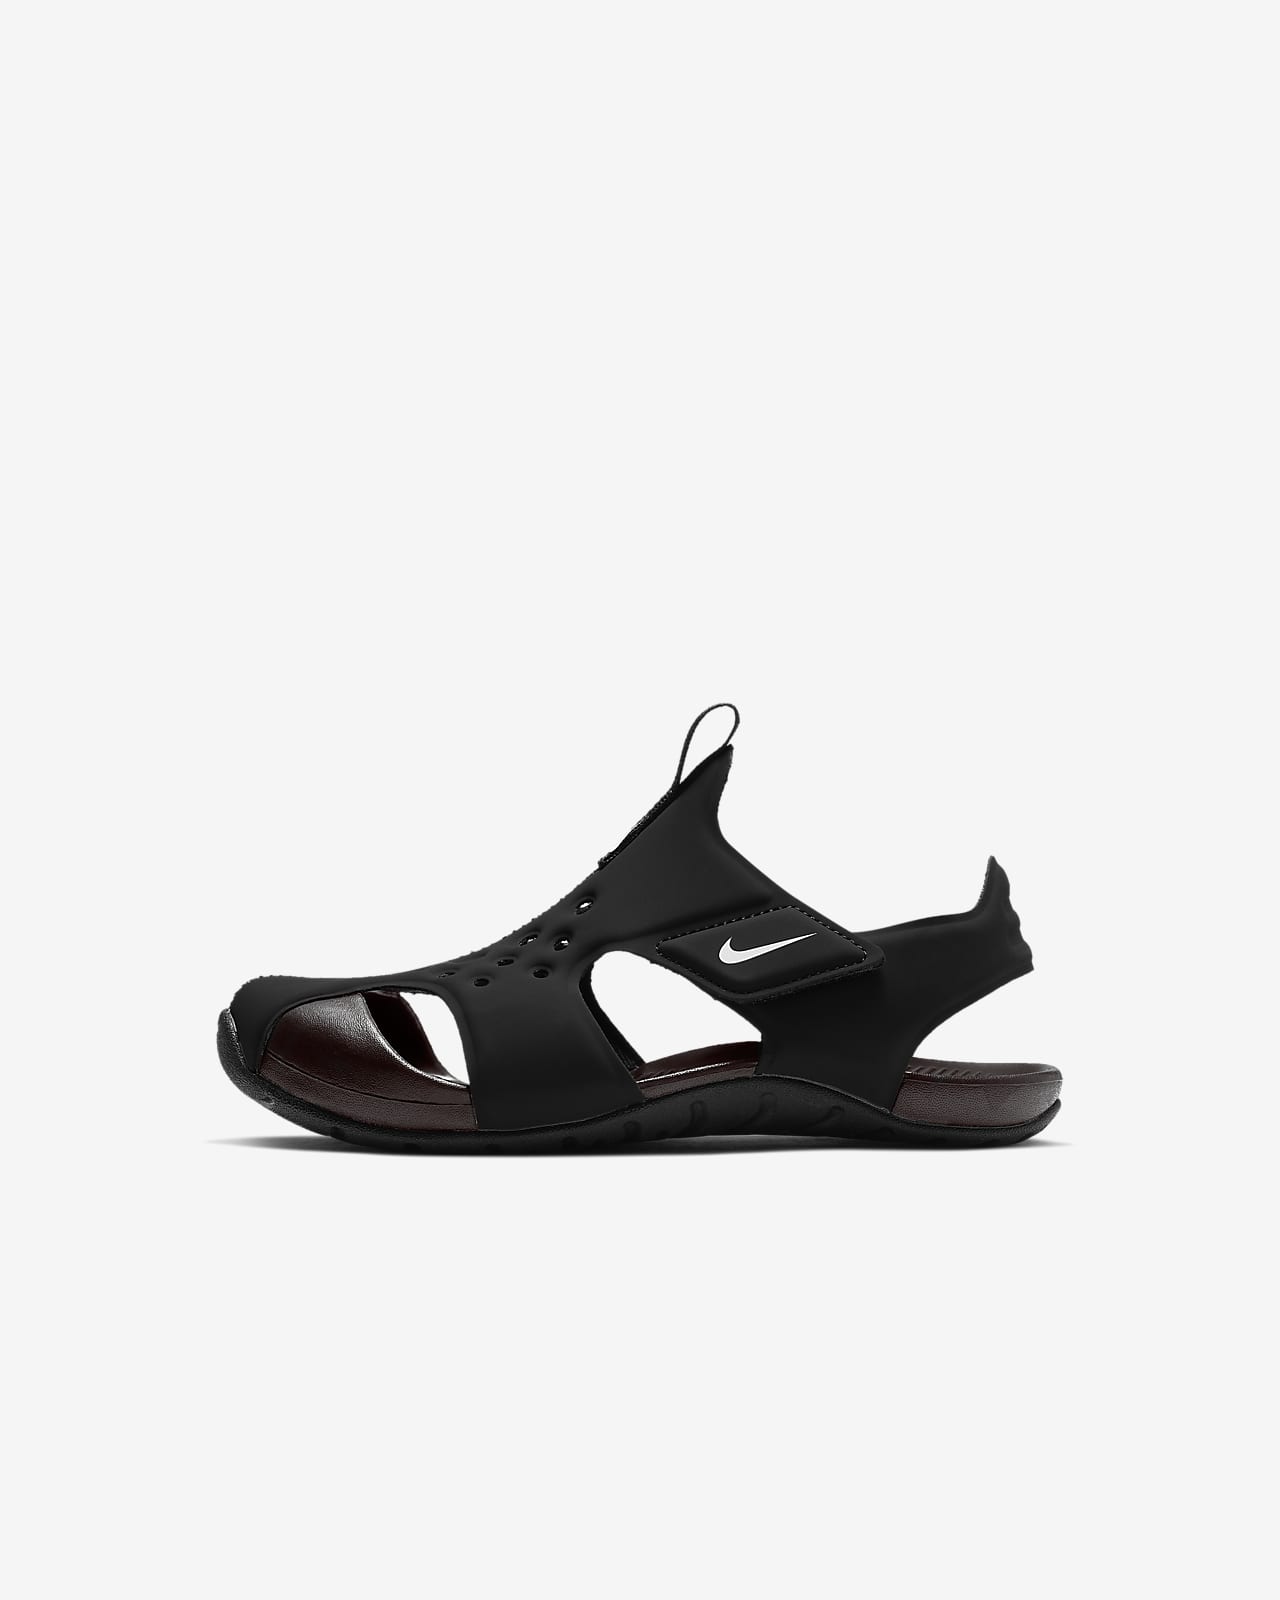 nike sandals size 2